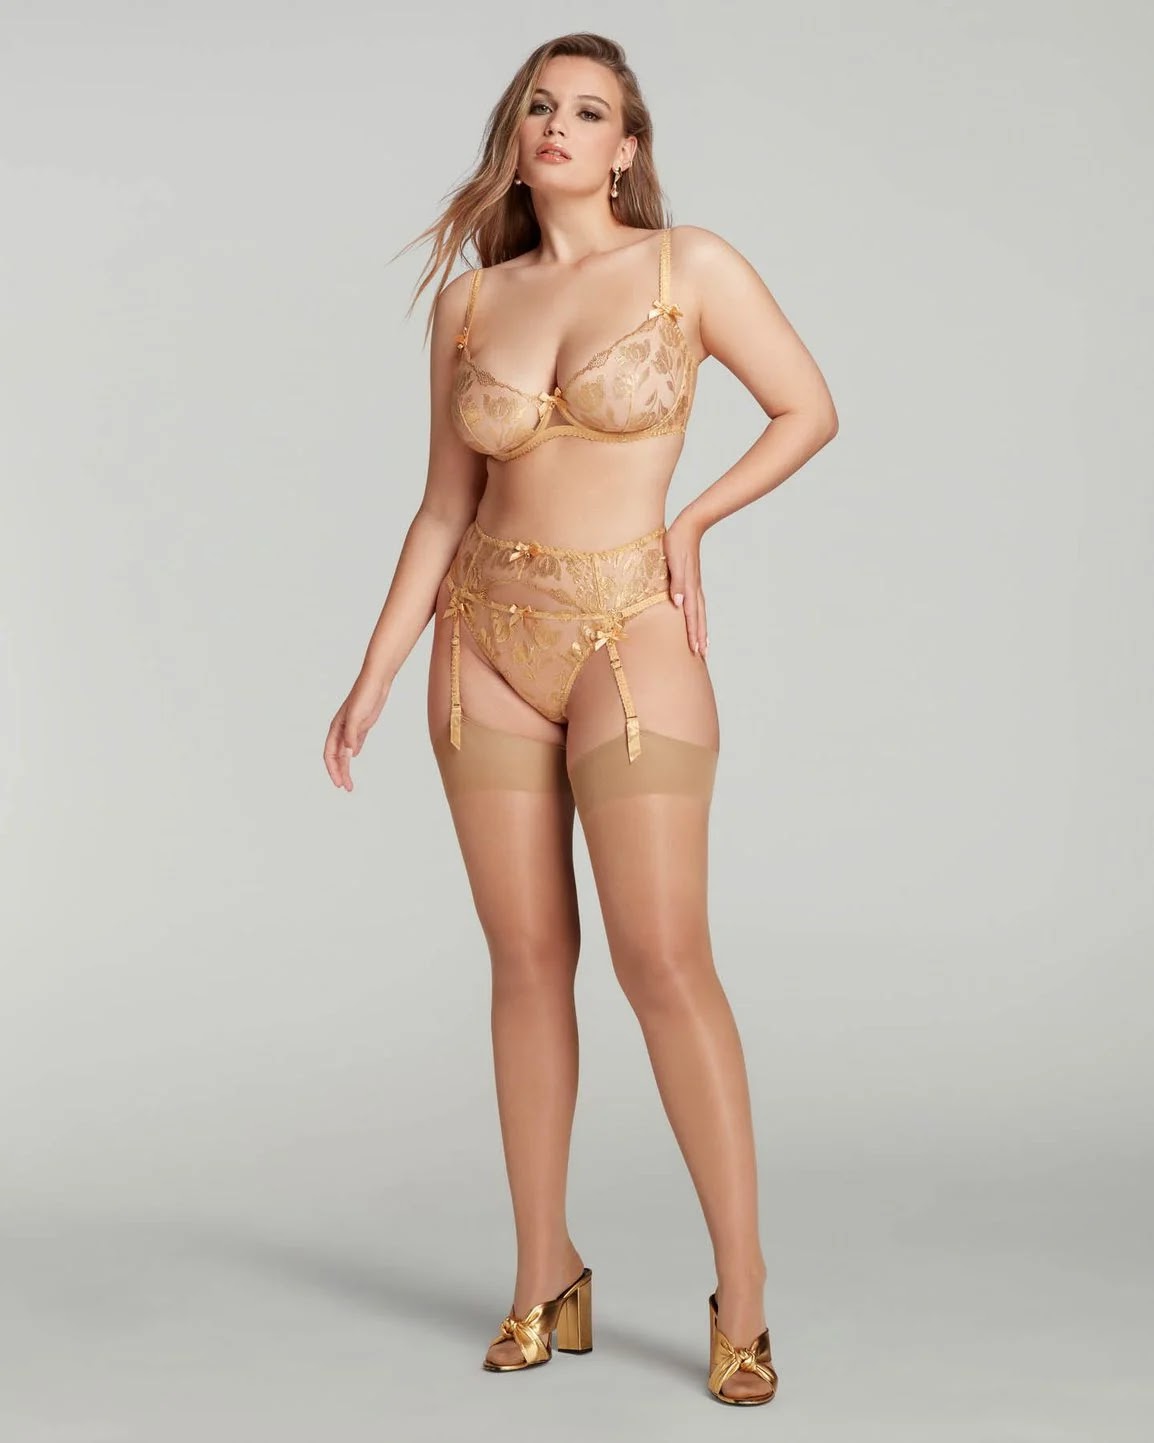 Satchel: Agent Provocateur Sparkle Gold Curve Bridal Lingerie - A Golden  Gift From The Magi At Christmas 2022